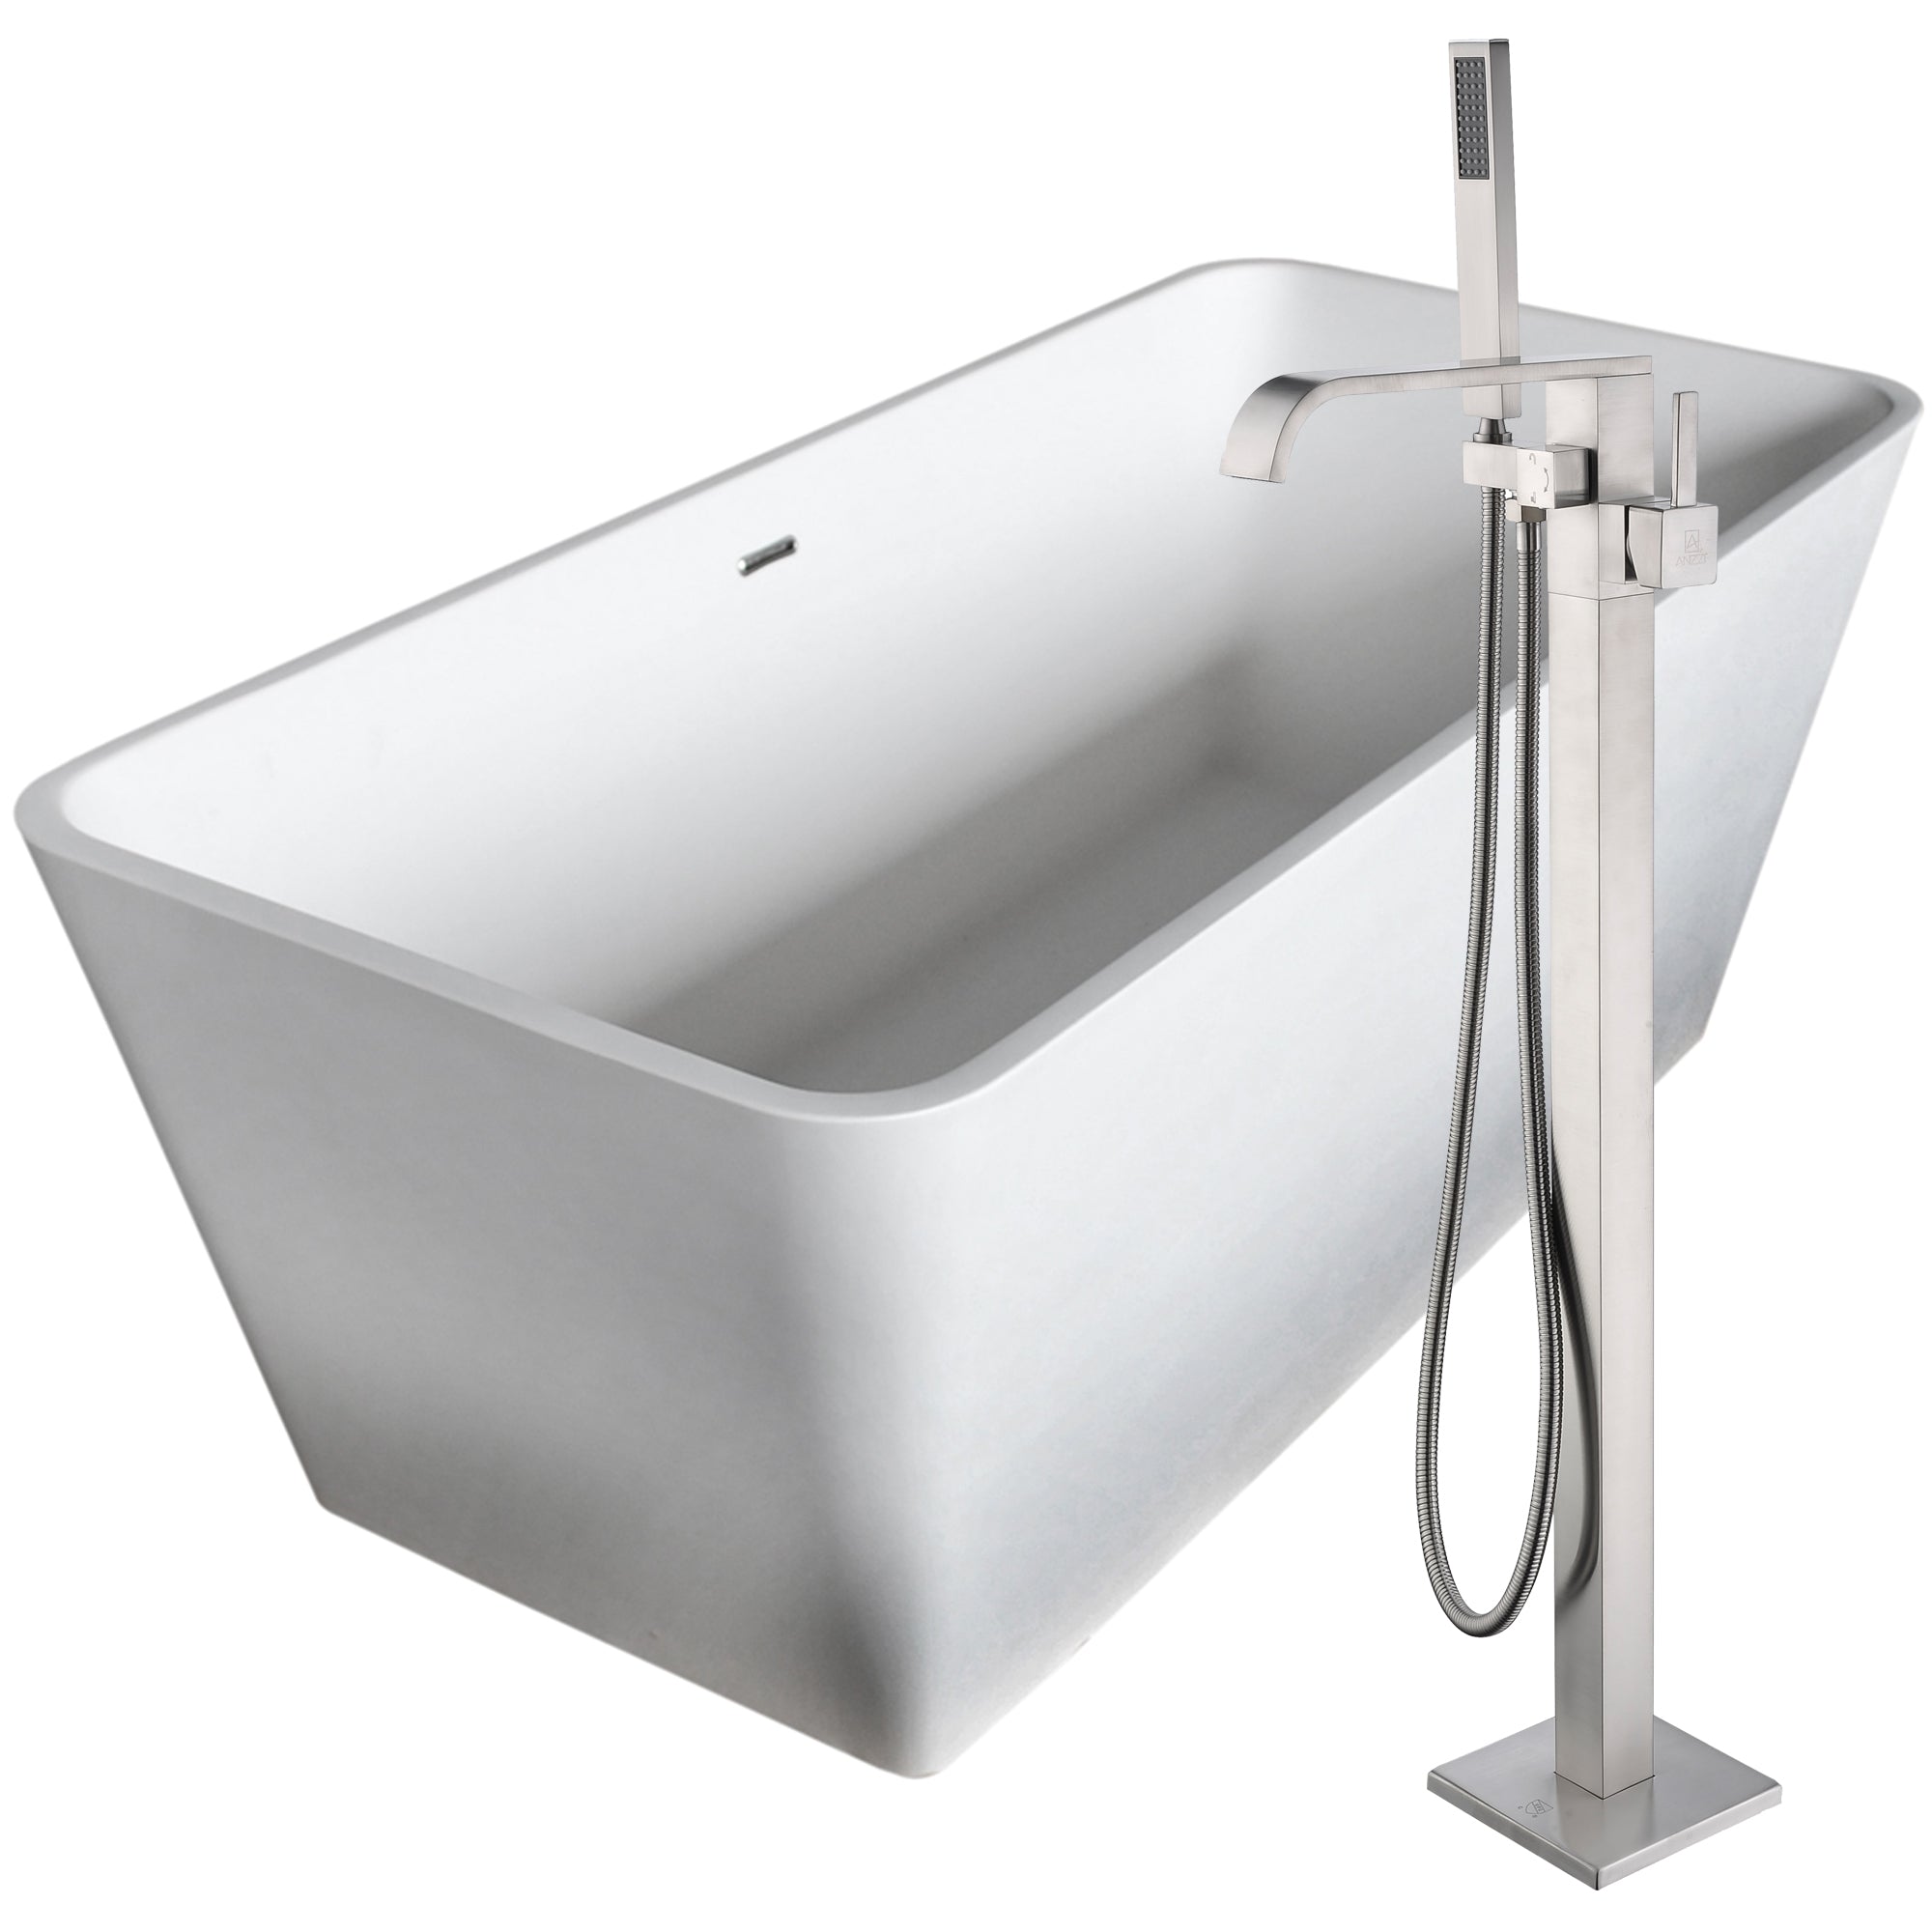 Anzzi Cenere 58.25 in. Solid Surface Soaking Bathtub in White with Angel Faucet in Brushed Nickel - Floor Mounted - FTAZ501-0044B - Vital Hydrotherapy